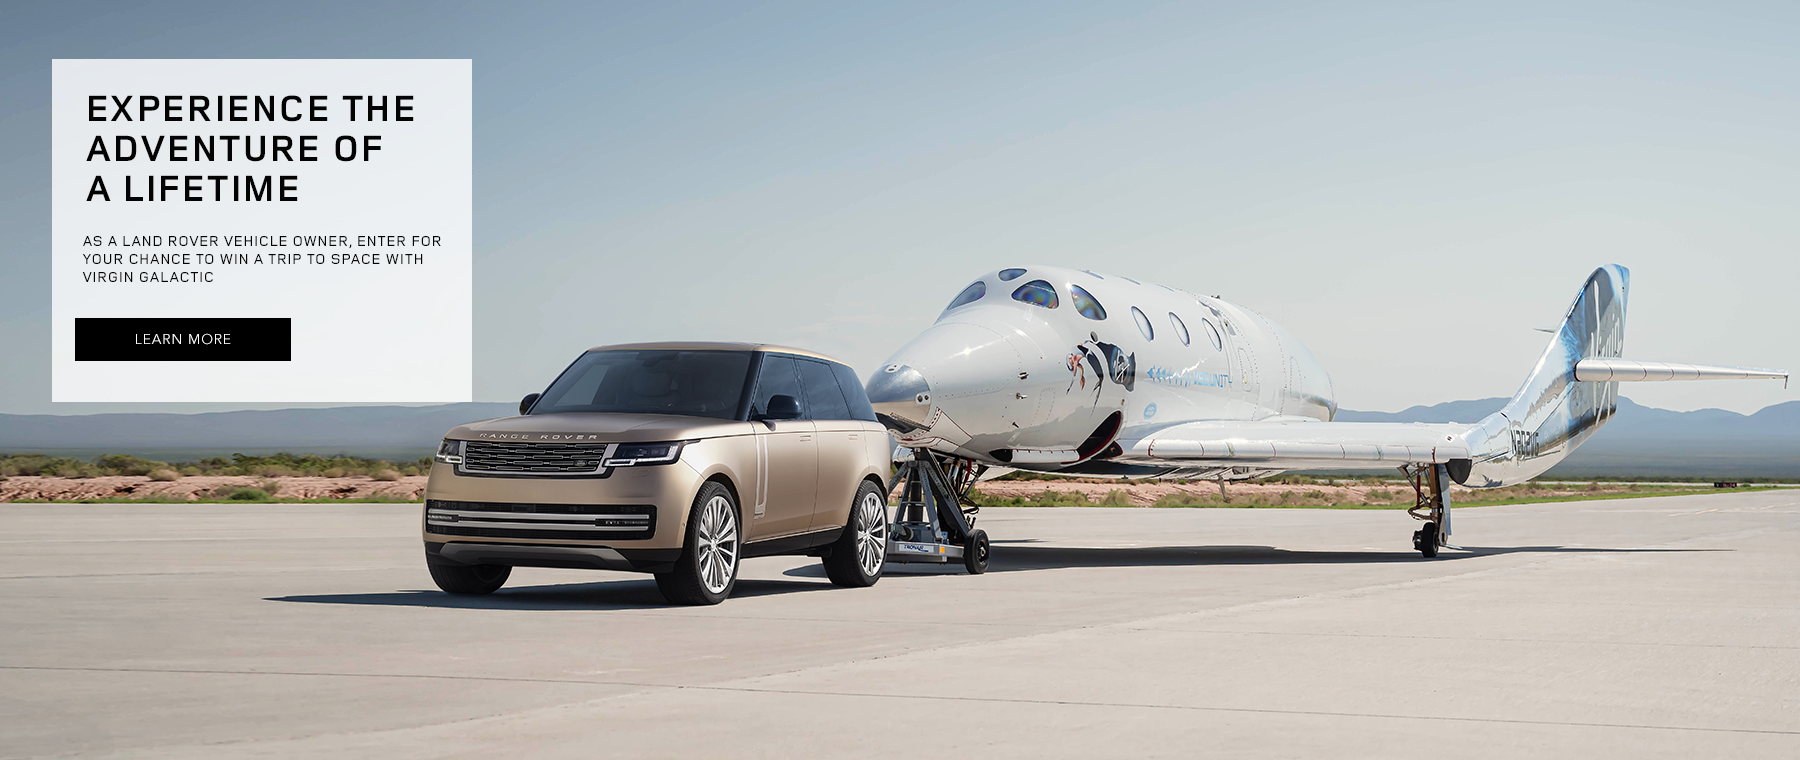 Land Rover Virgin Galactic - Experience the Adventure of a lifetimeAs a land rover vehicle owner, enter for your chance to win a trip to space with Virgin Galactic. New 2023 Range Rover in color gold pulling a jet